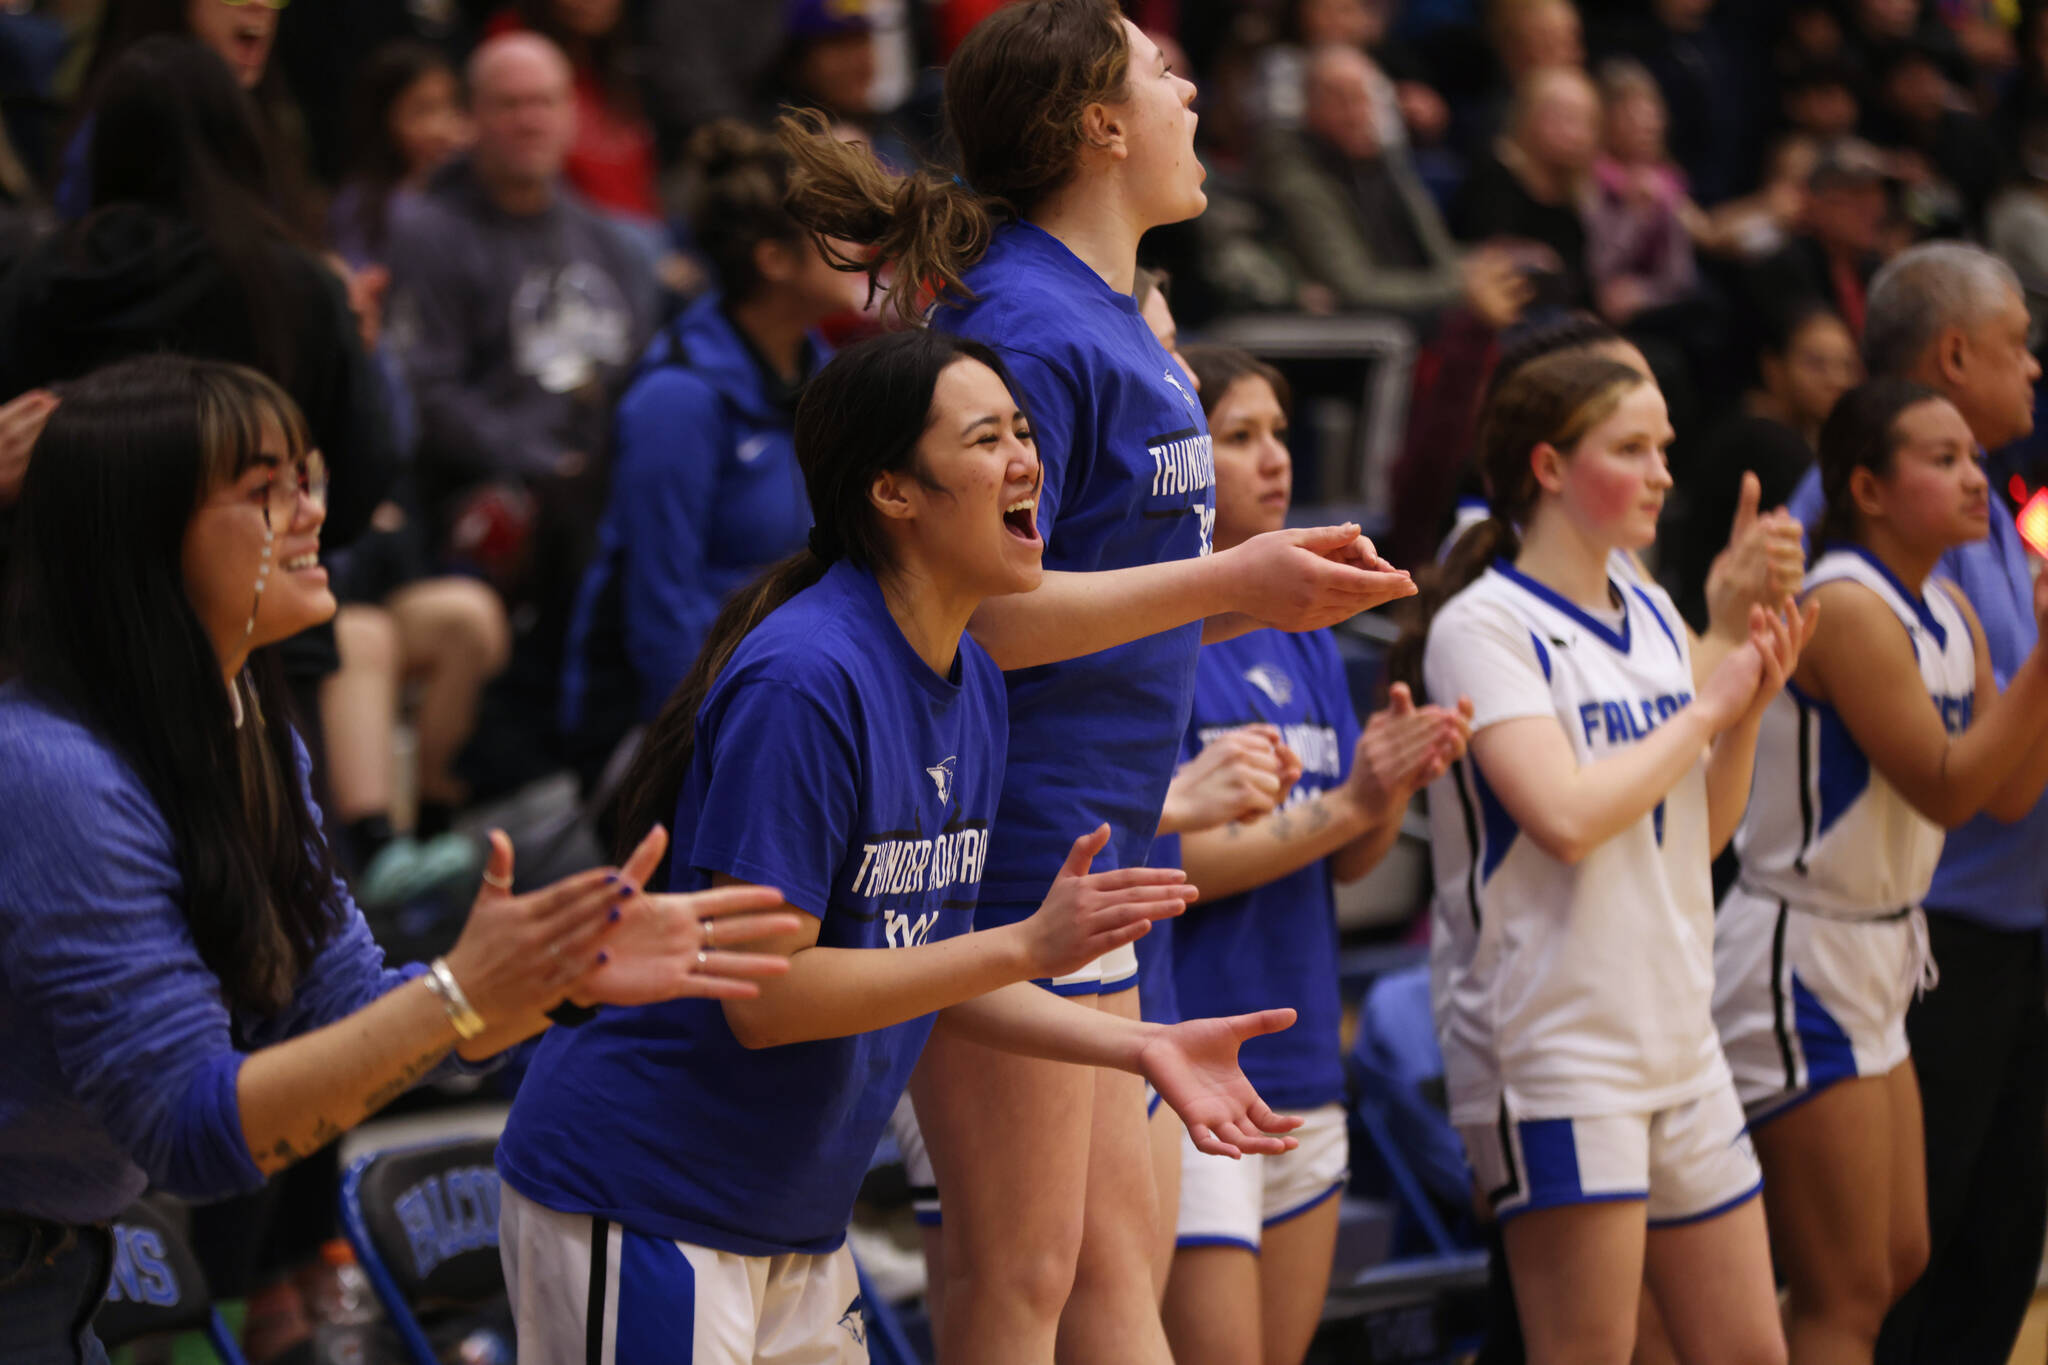 The TMHS bench reacts to a foul call late in a Tuesday night home win against JDHS. The final seconds of the game gave them plenty of reason to cheer as TMHS was able to complete a narrow comeback victory. (Ben Hohenstatt / Juneau Empire)